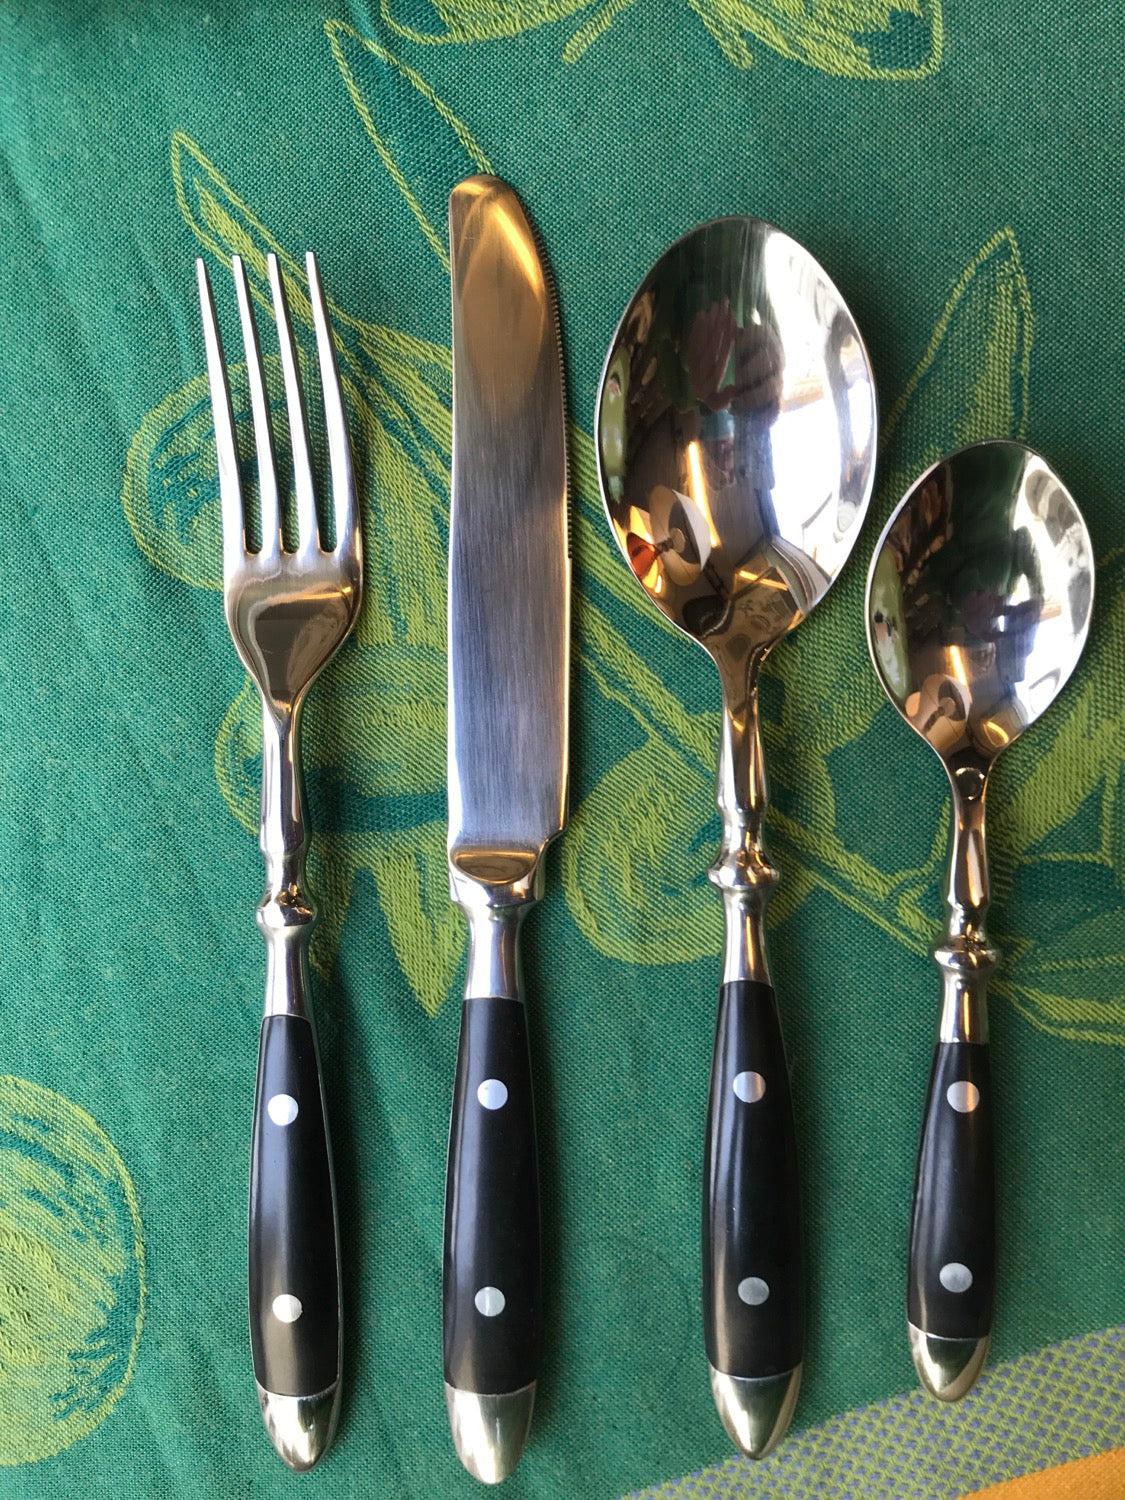 Country cutlery service for 6 people